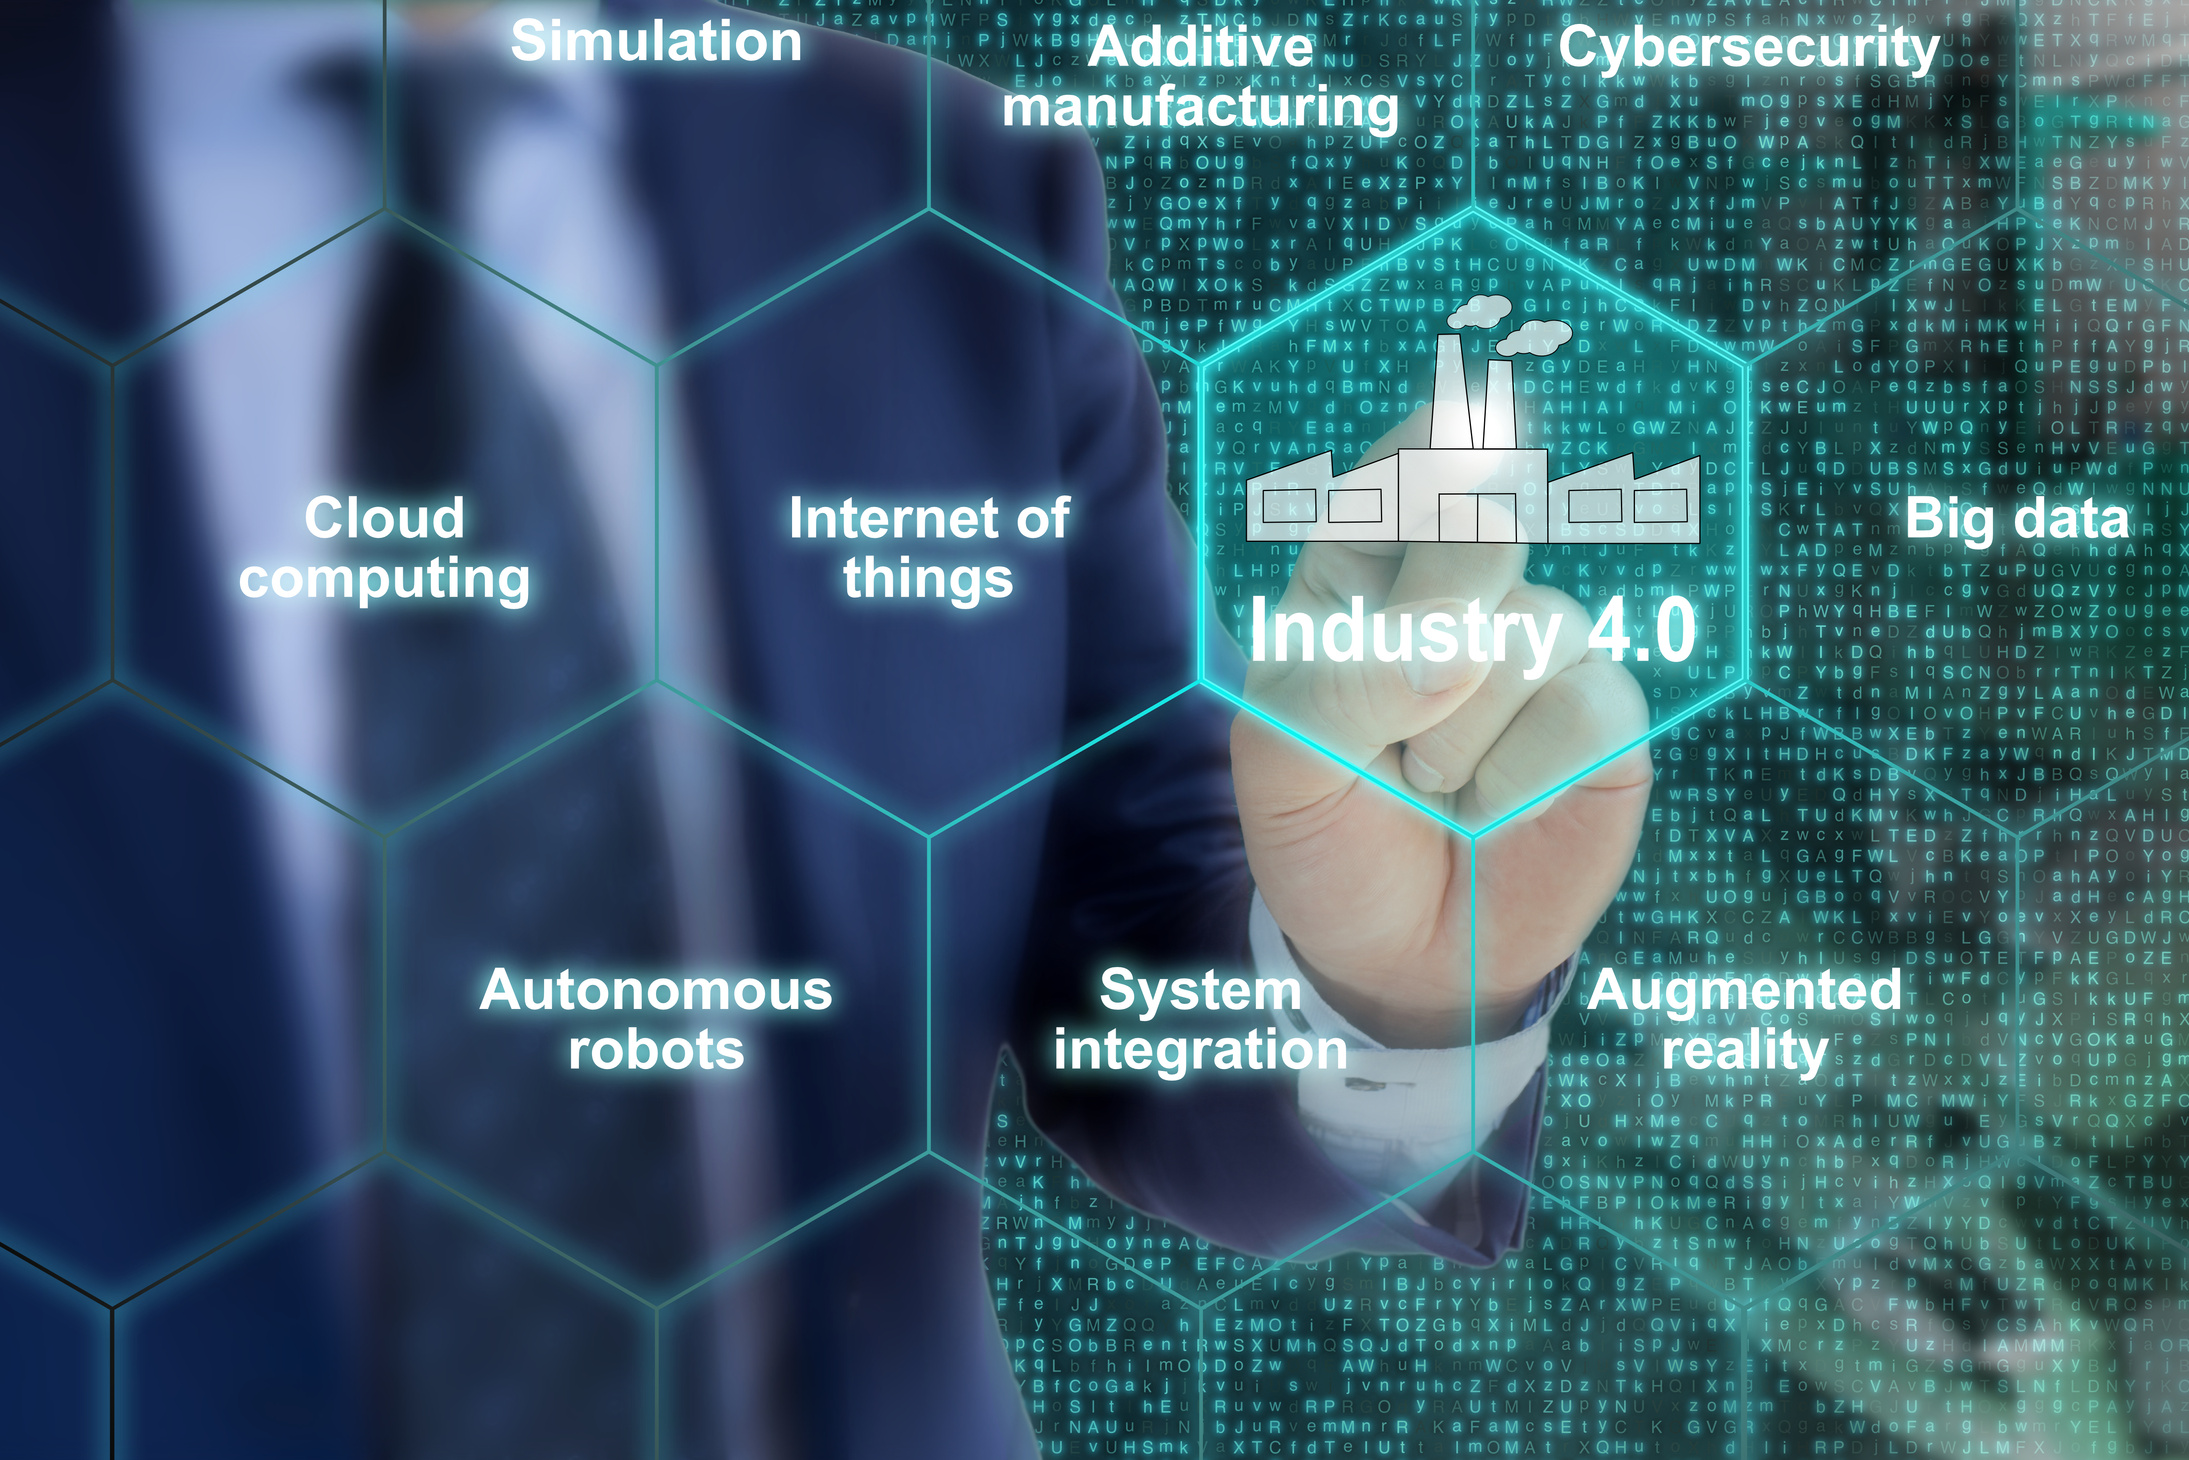 IT expert explains components of industry 4.0